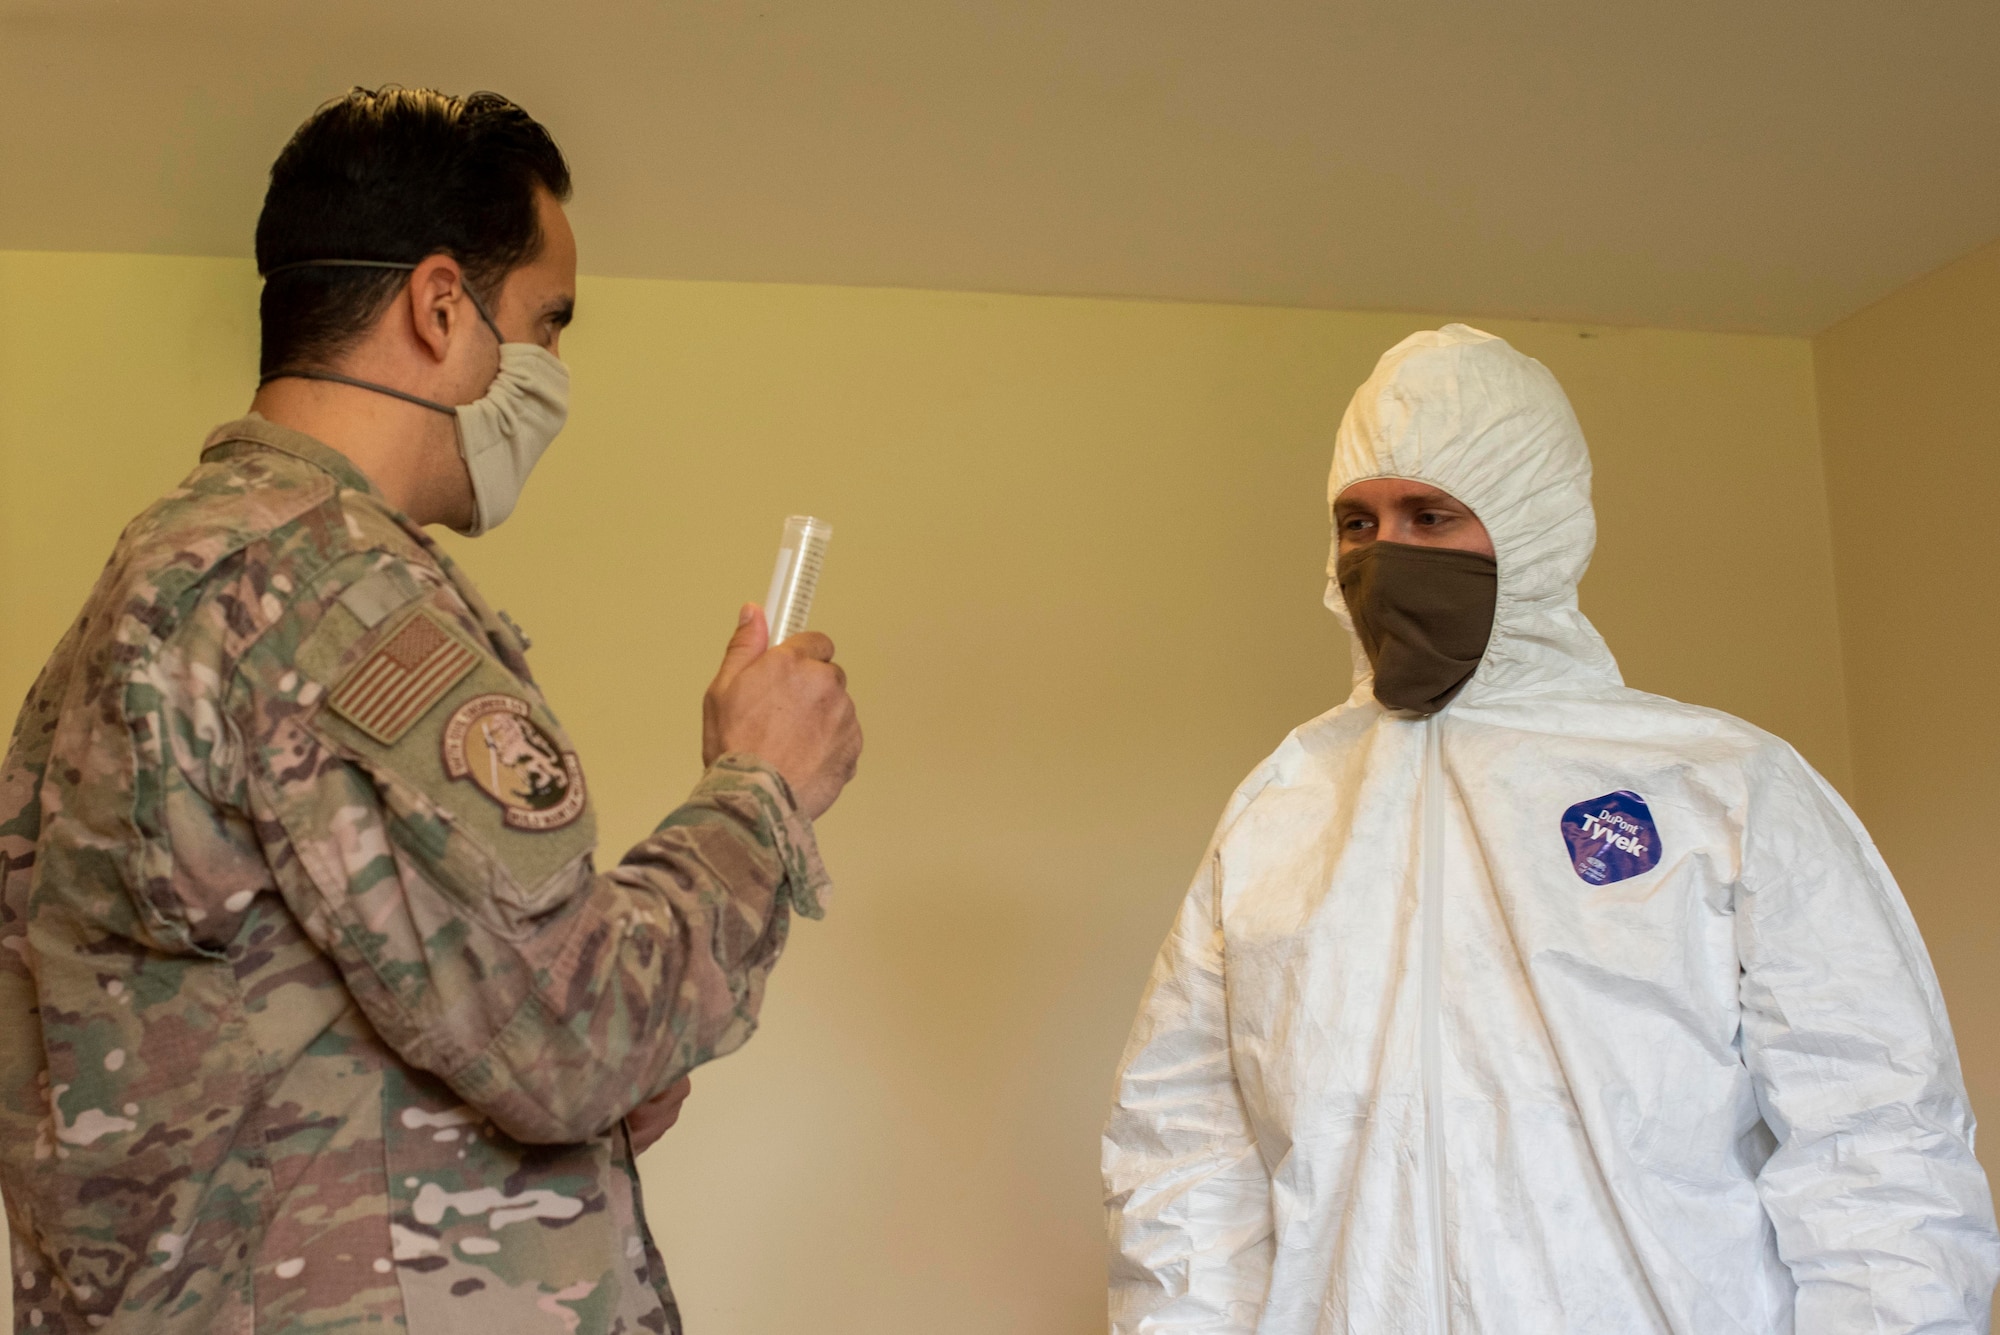 Tech. Sgt. Matthew Borquez, 100th Civil Engineer Squadron emergency management logistics noncommissioned officer in charge, instructs a Team Mildenhall Airman on the proper amount of household bleach needed to create a cleaning solution at RAF Mildenhall, England, April 15, 2020. Cleaning-team members use chemicals that would destroy any potential Coronavirus remaining on common surfaces. (U.S. Air Force photo by Airman 1st Class Joseph Barron)